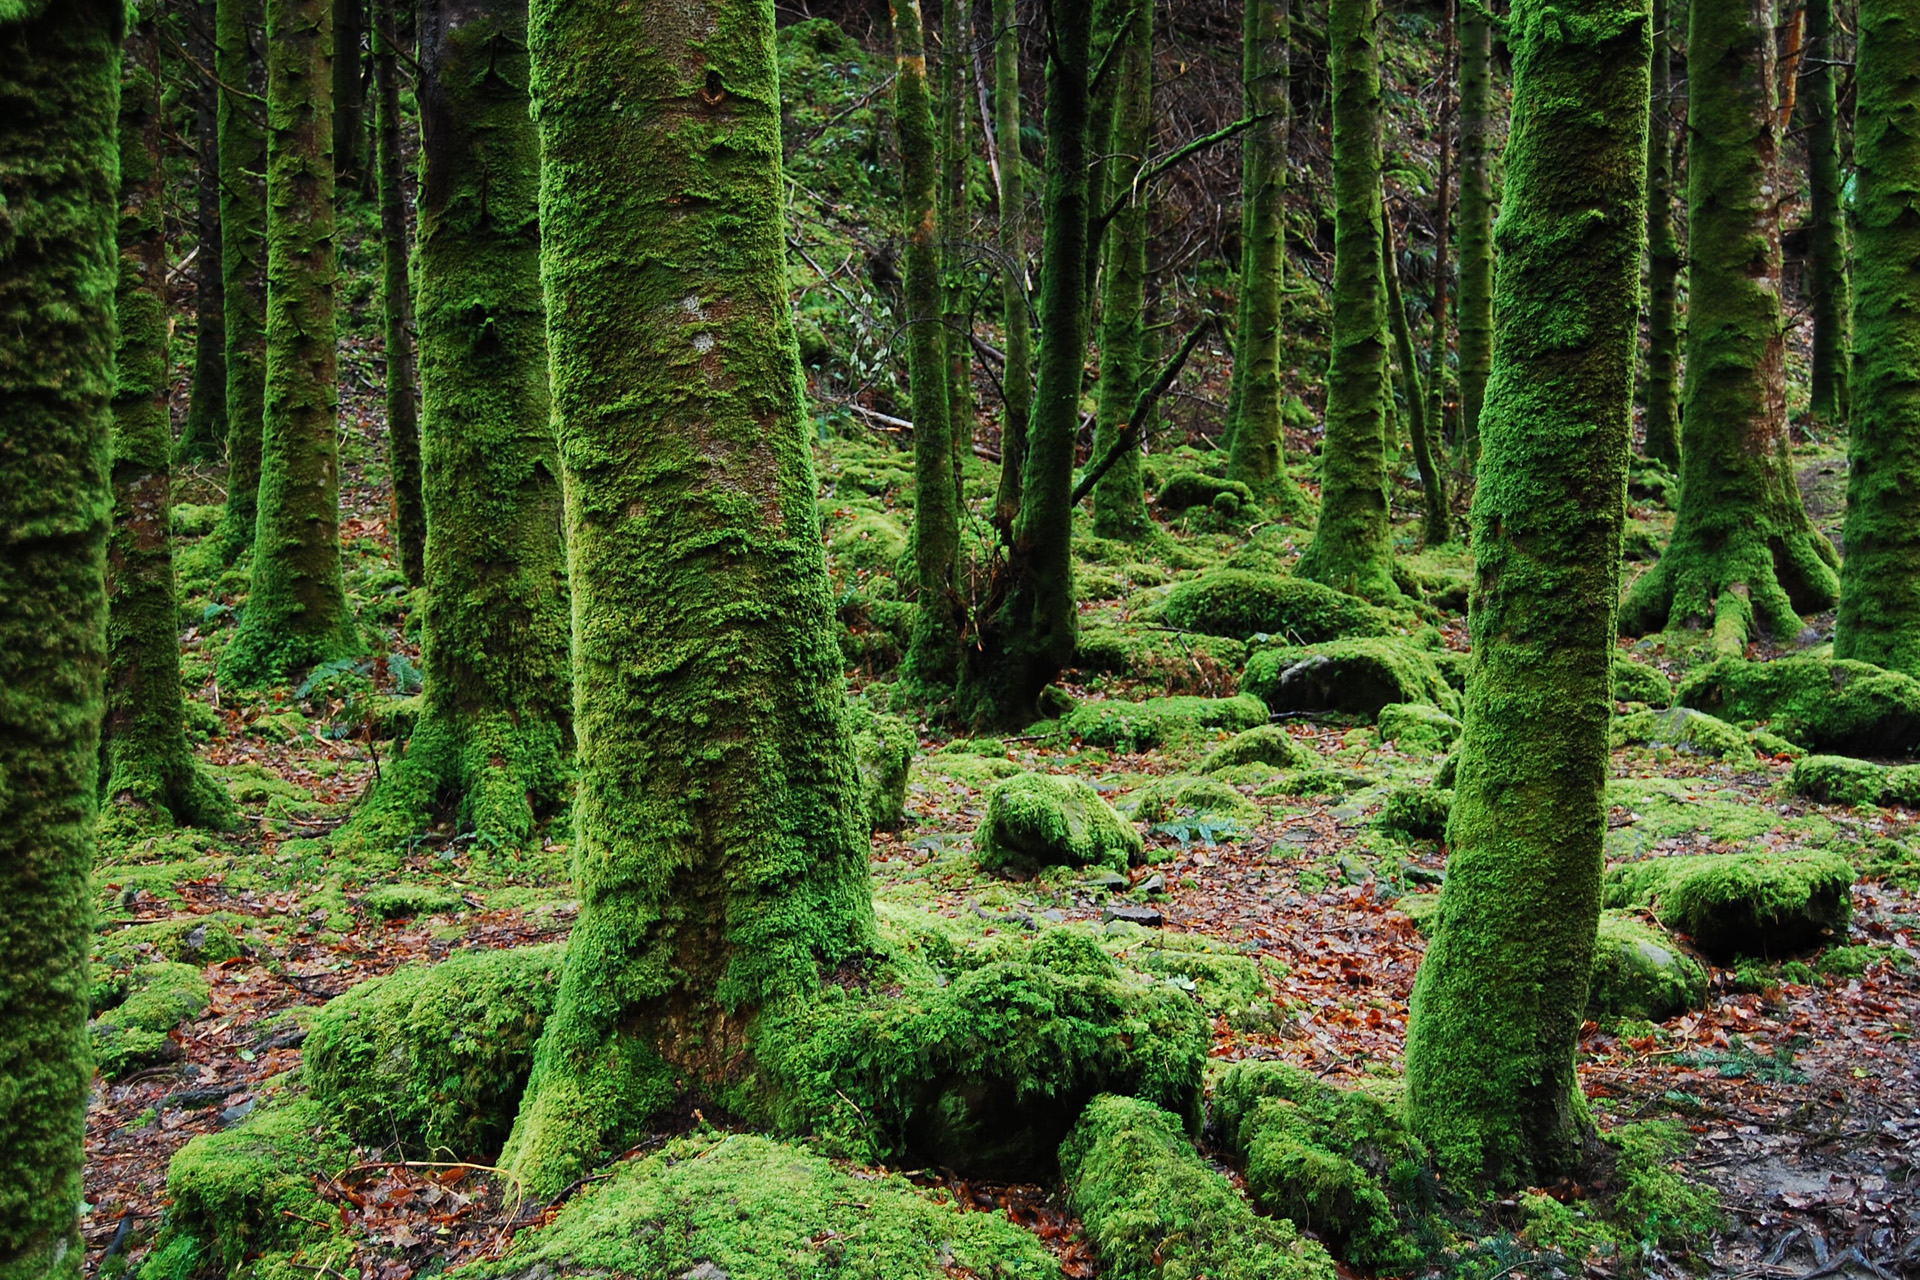 Trees covered in moss in a forest